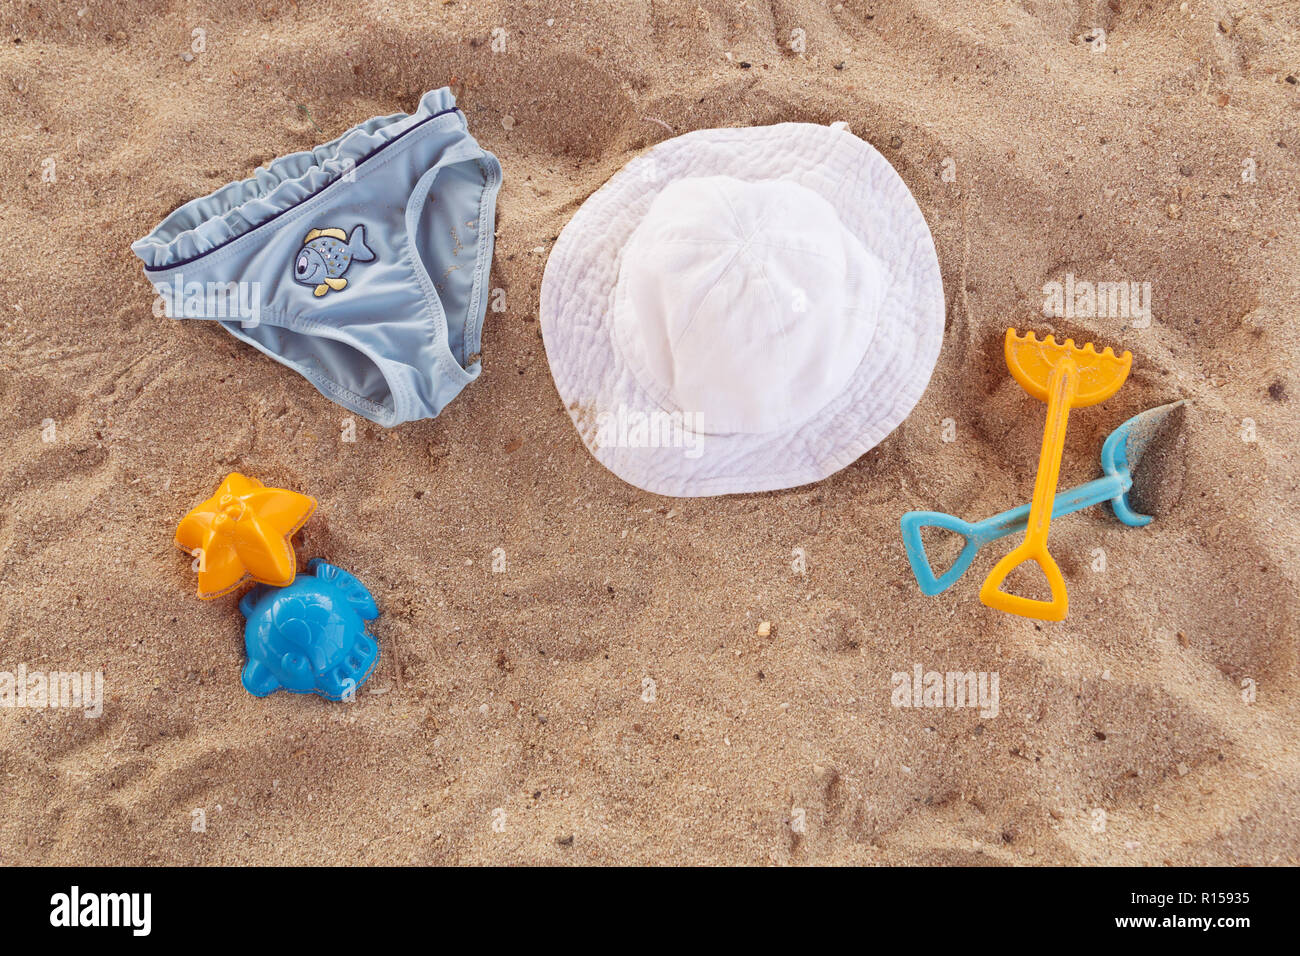 Beach accessories for kids flat lay. Top view of children beach items on sand. Baby plastic scoop, rake, hat and blue children's panties. Water toys. Family summer vacation in tropical resort. Stock Photo